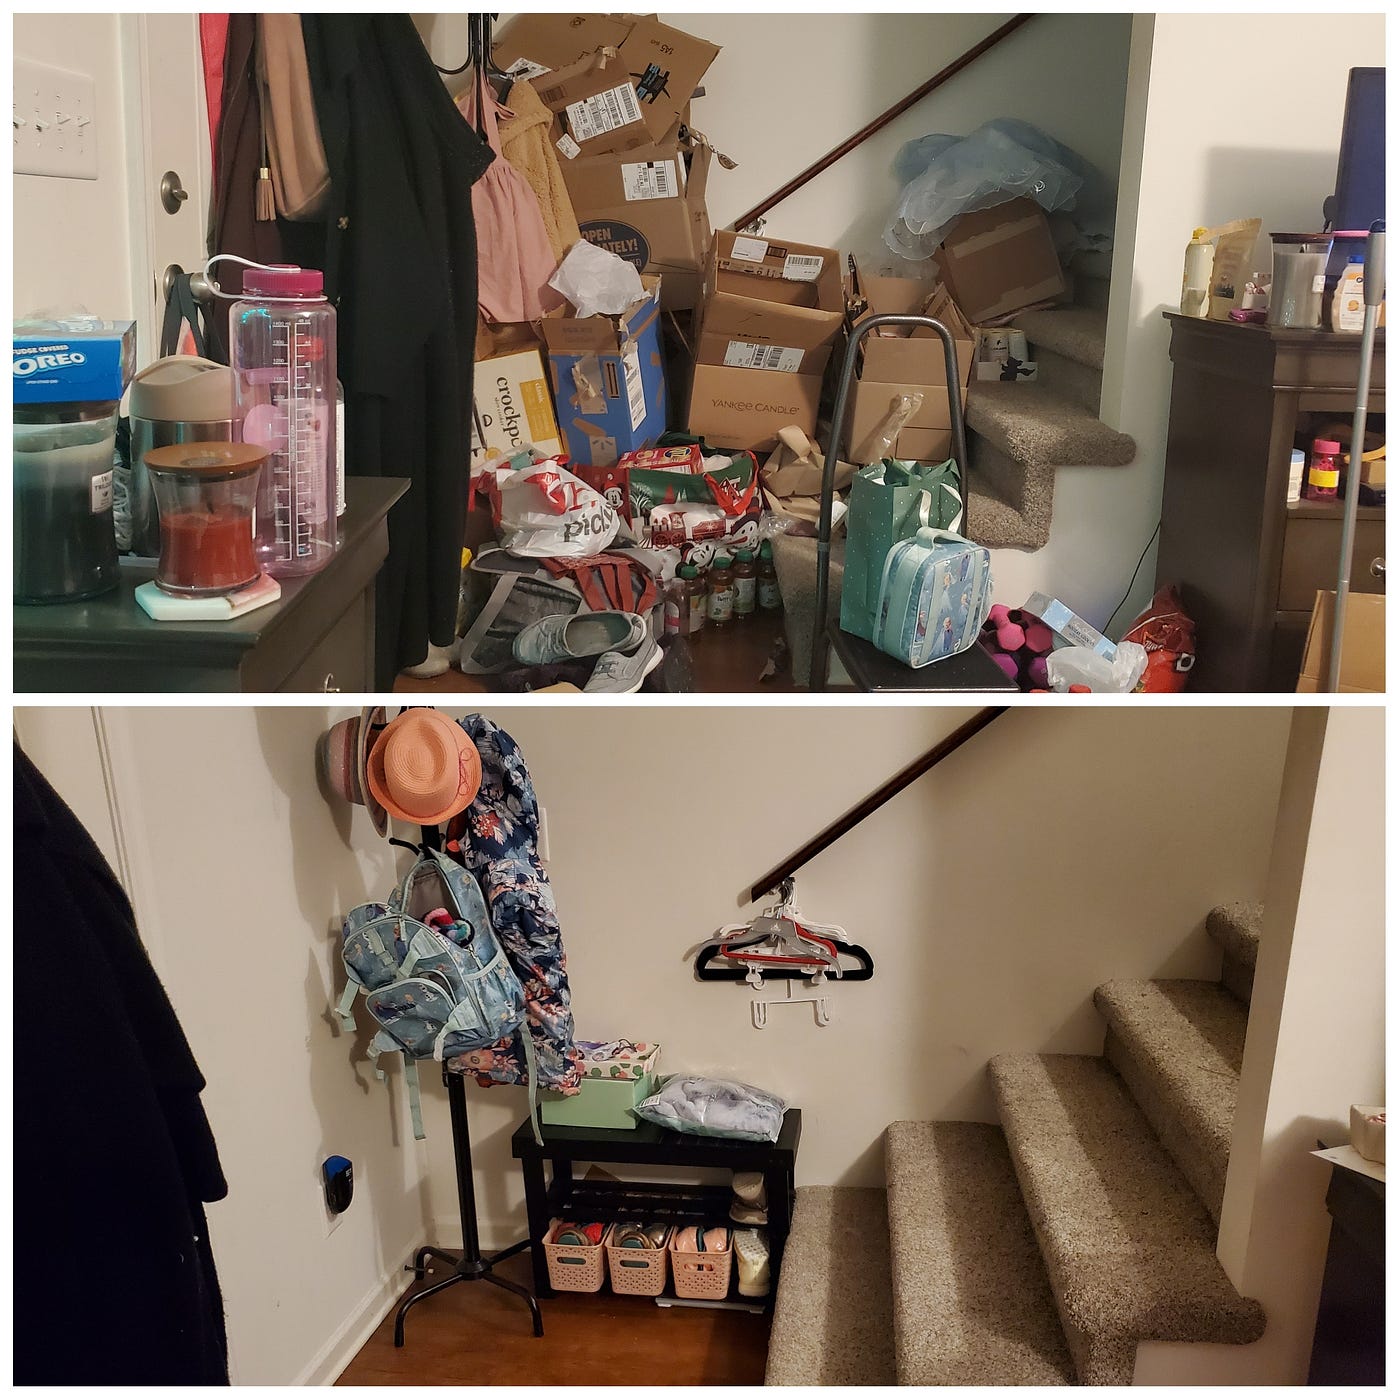 4 hours and 10 trash bags later my closet is clean/organized! Still have  the rest of the room to go but this feels like a great start. : r/hoarding